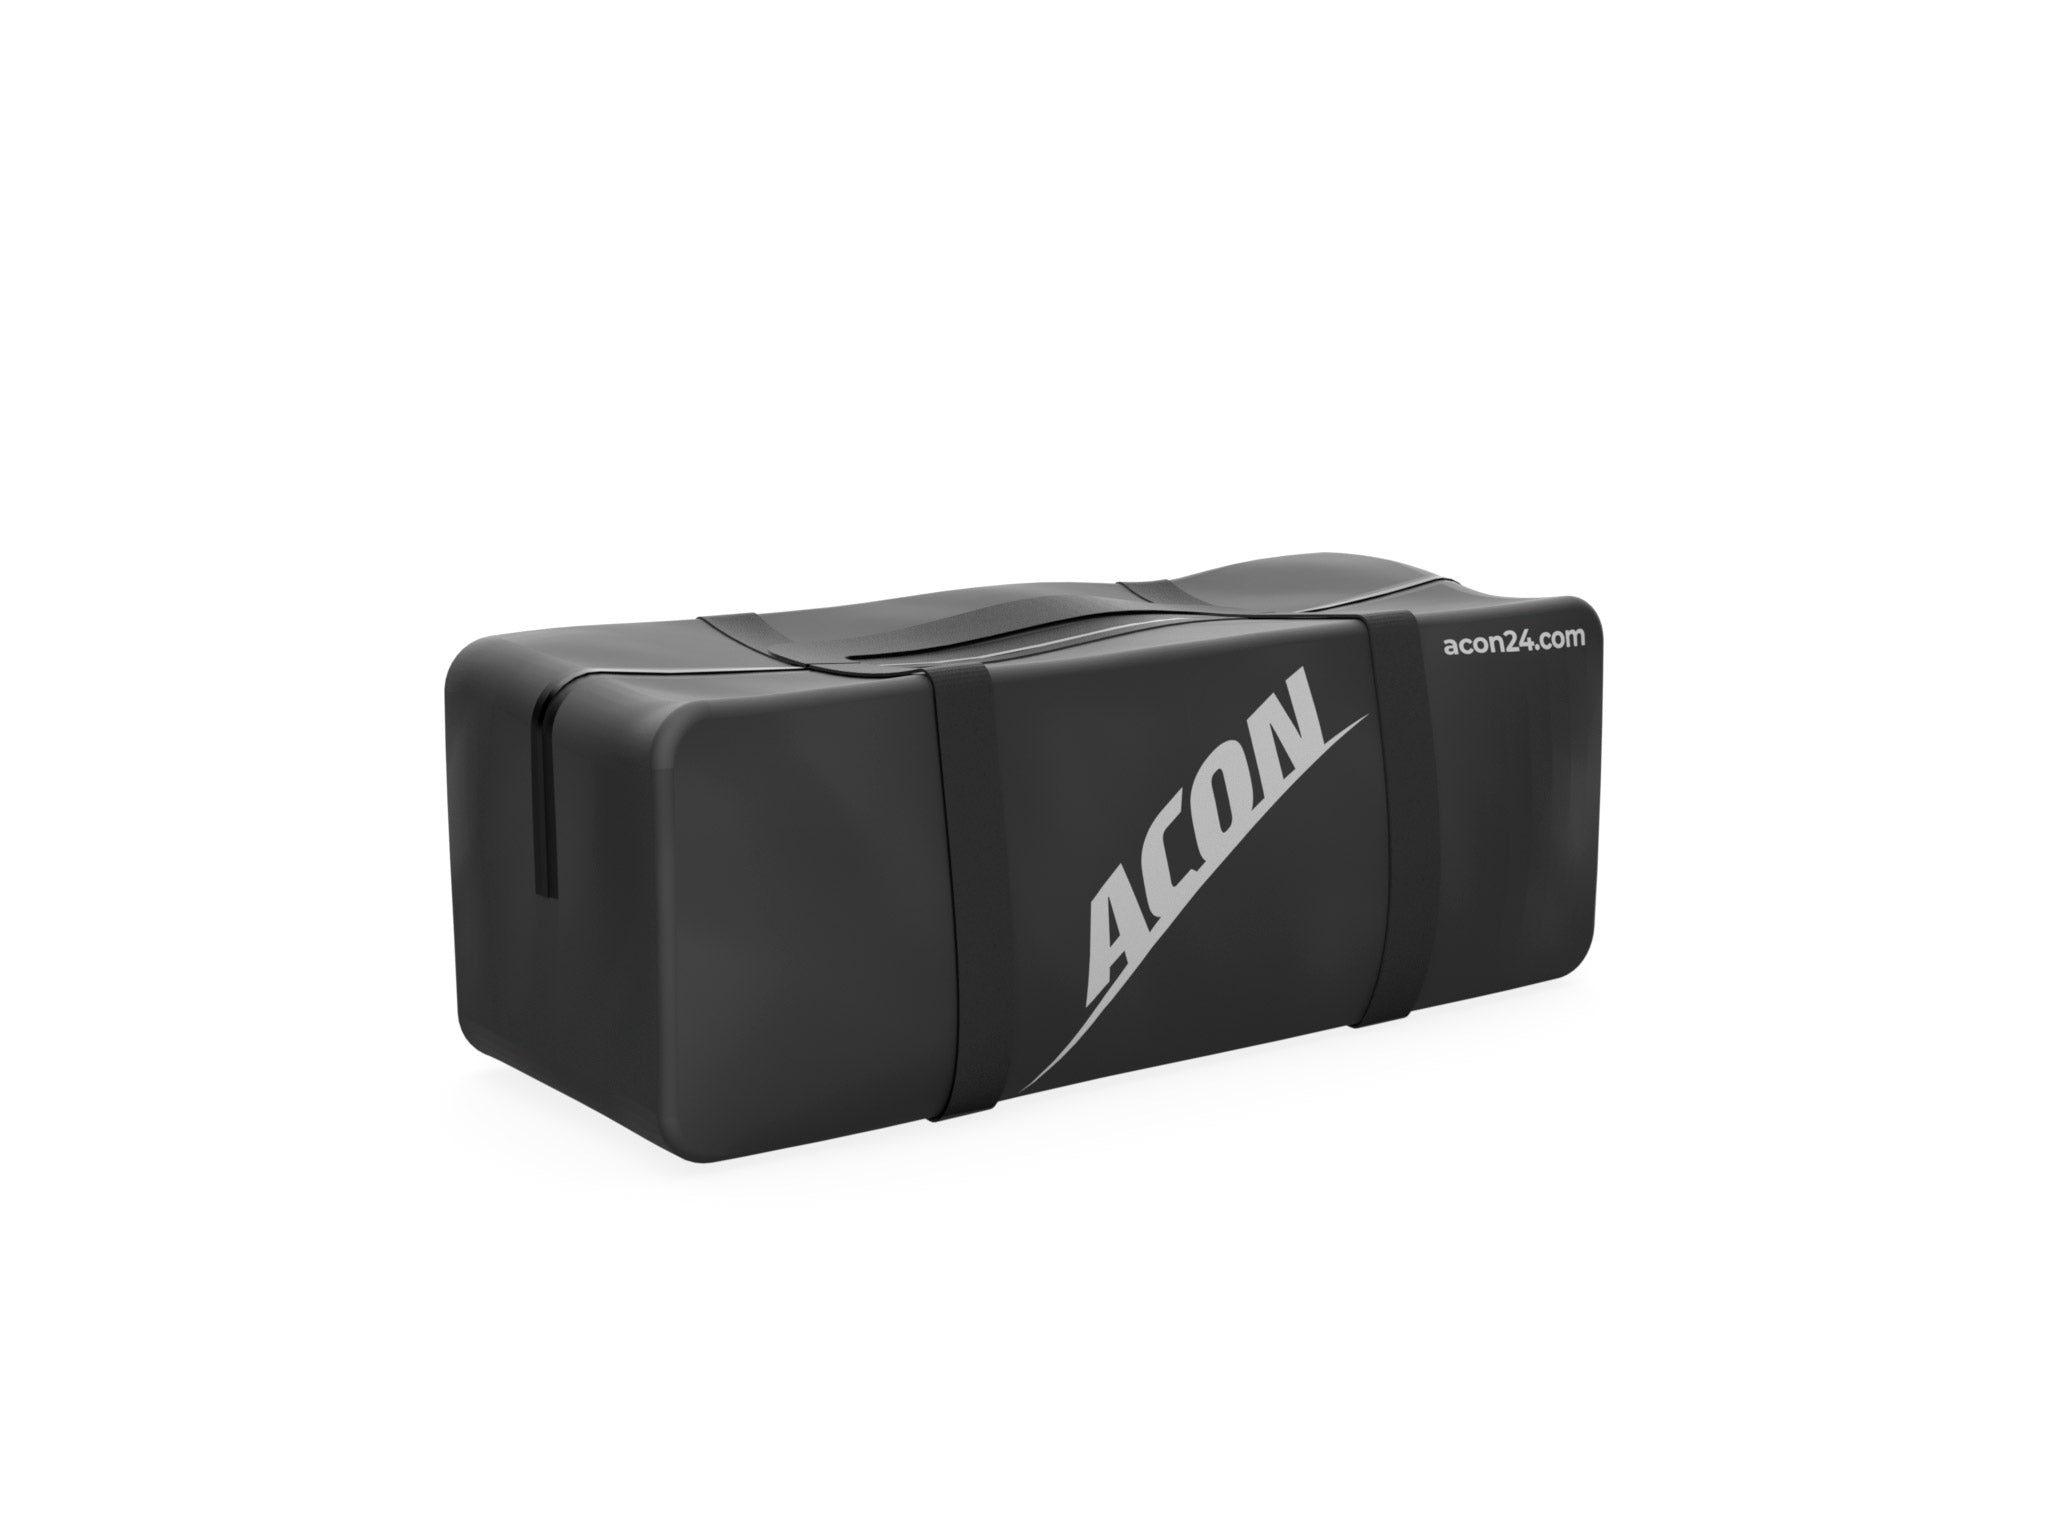 ACON AirTrack 10ft and ACON AirBlock package comes with a carrying bag